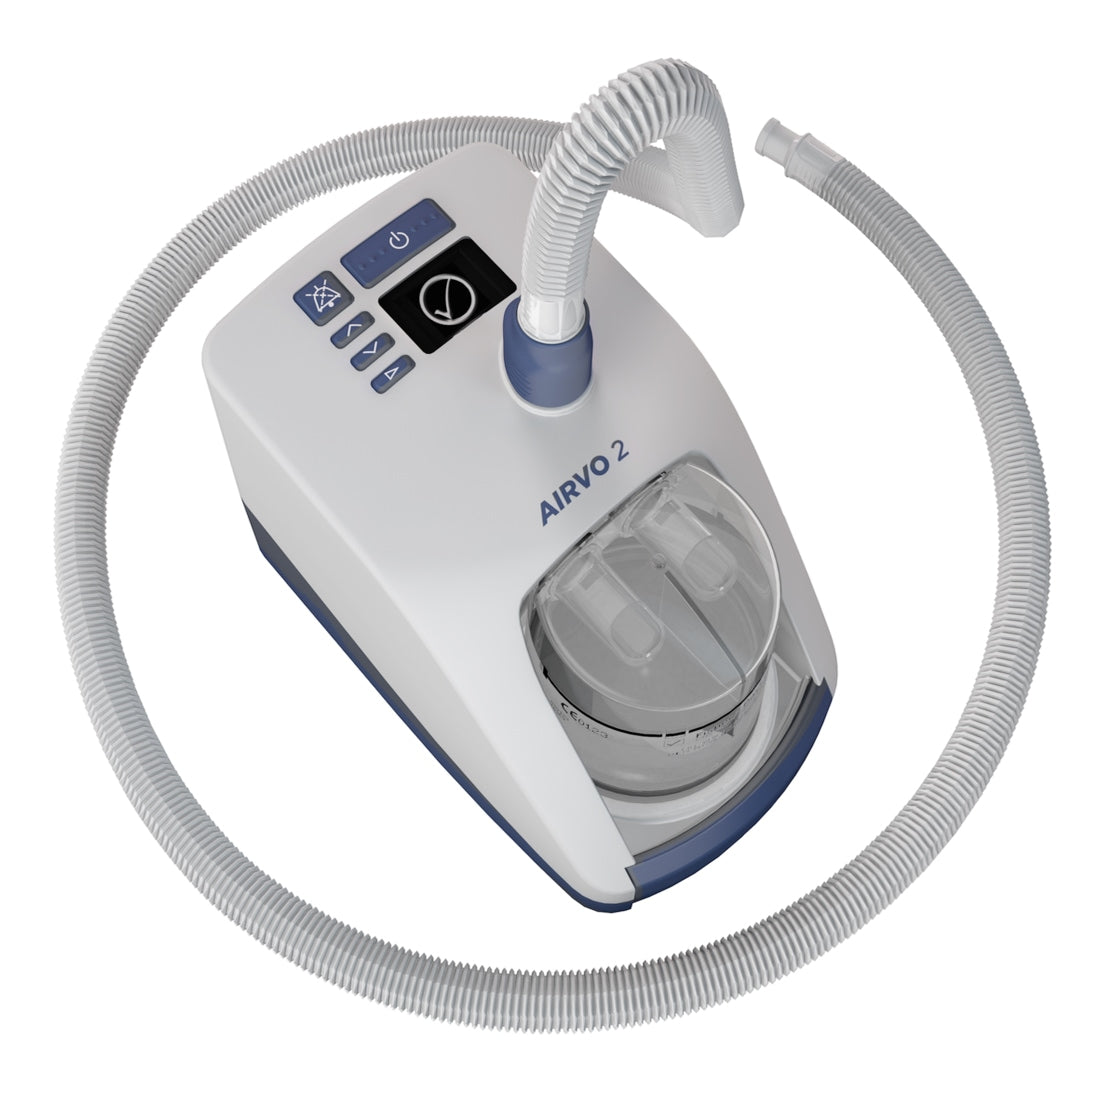 myAIRVO 2 Humidified High Flow Generator System (Free Cannula Included)